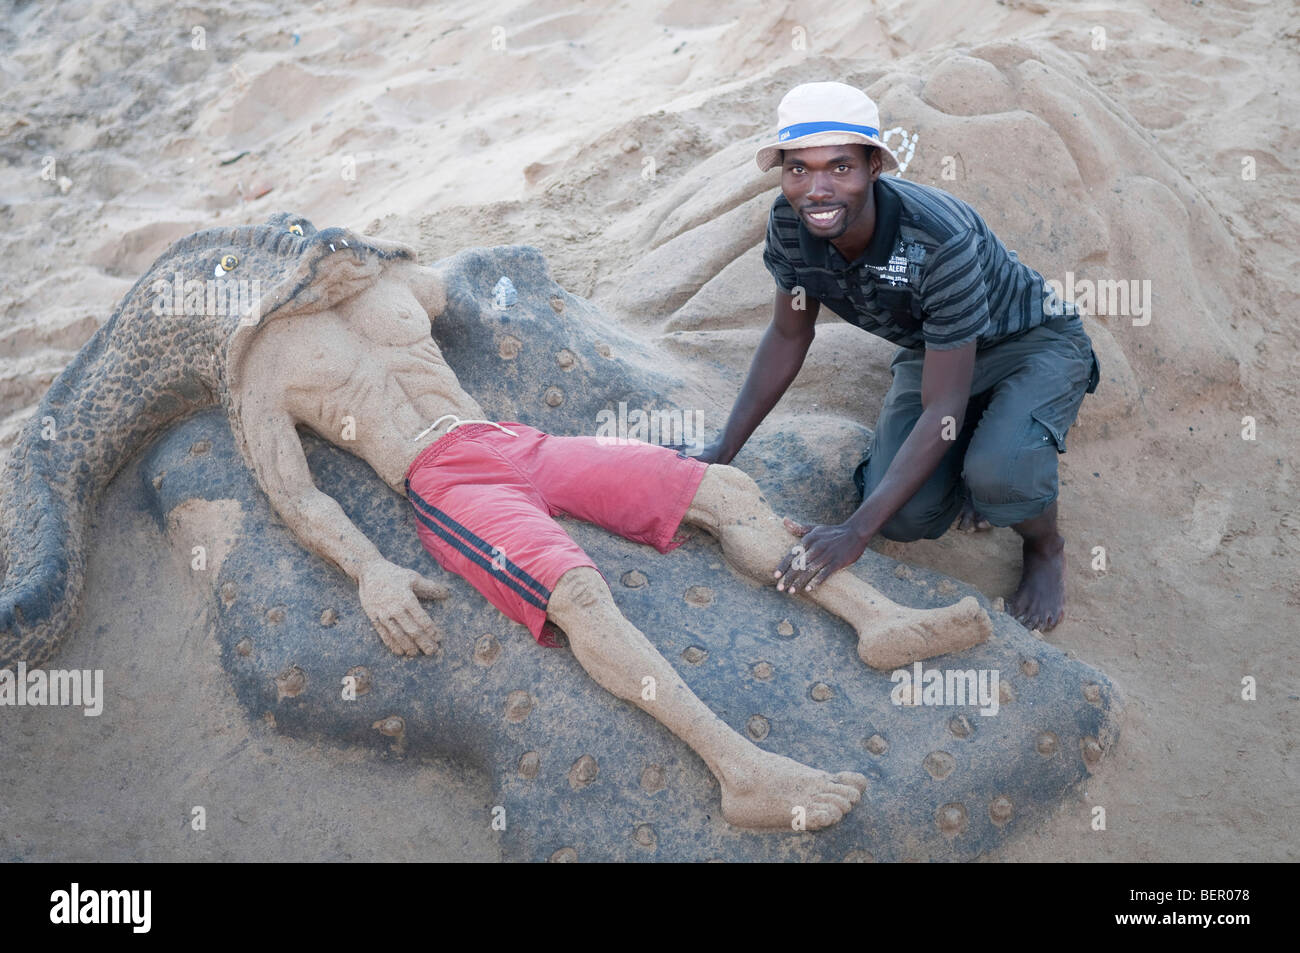 Sand sculpture created by Zimbabwean refugee on Durban beach South Africa Stock Photo